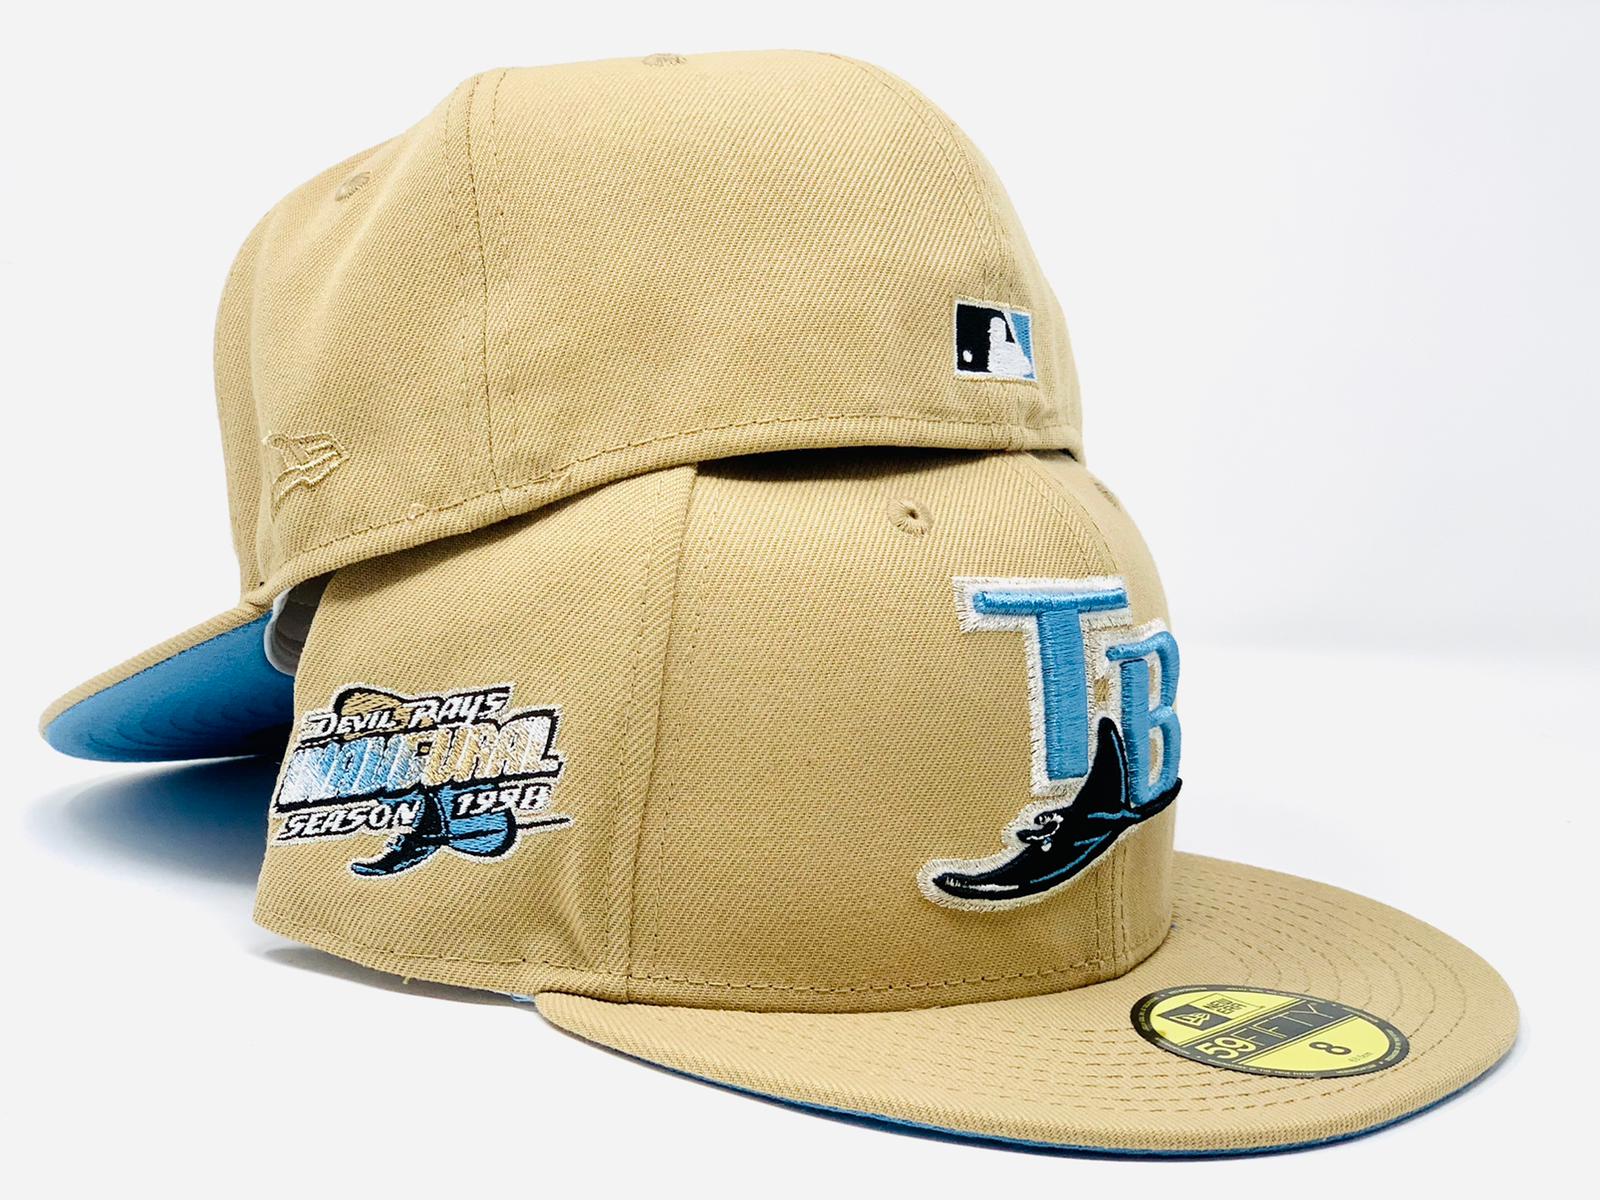 Tampa Bay Devil Rays New Era Diamond Fitted 1995 Vintage Hat -  Norway